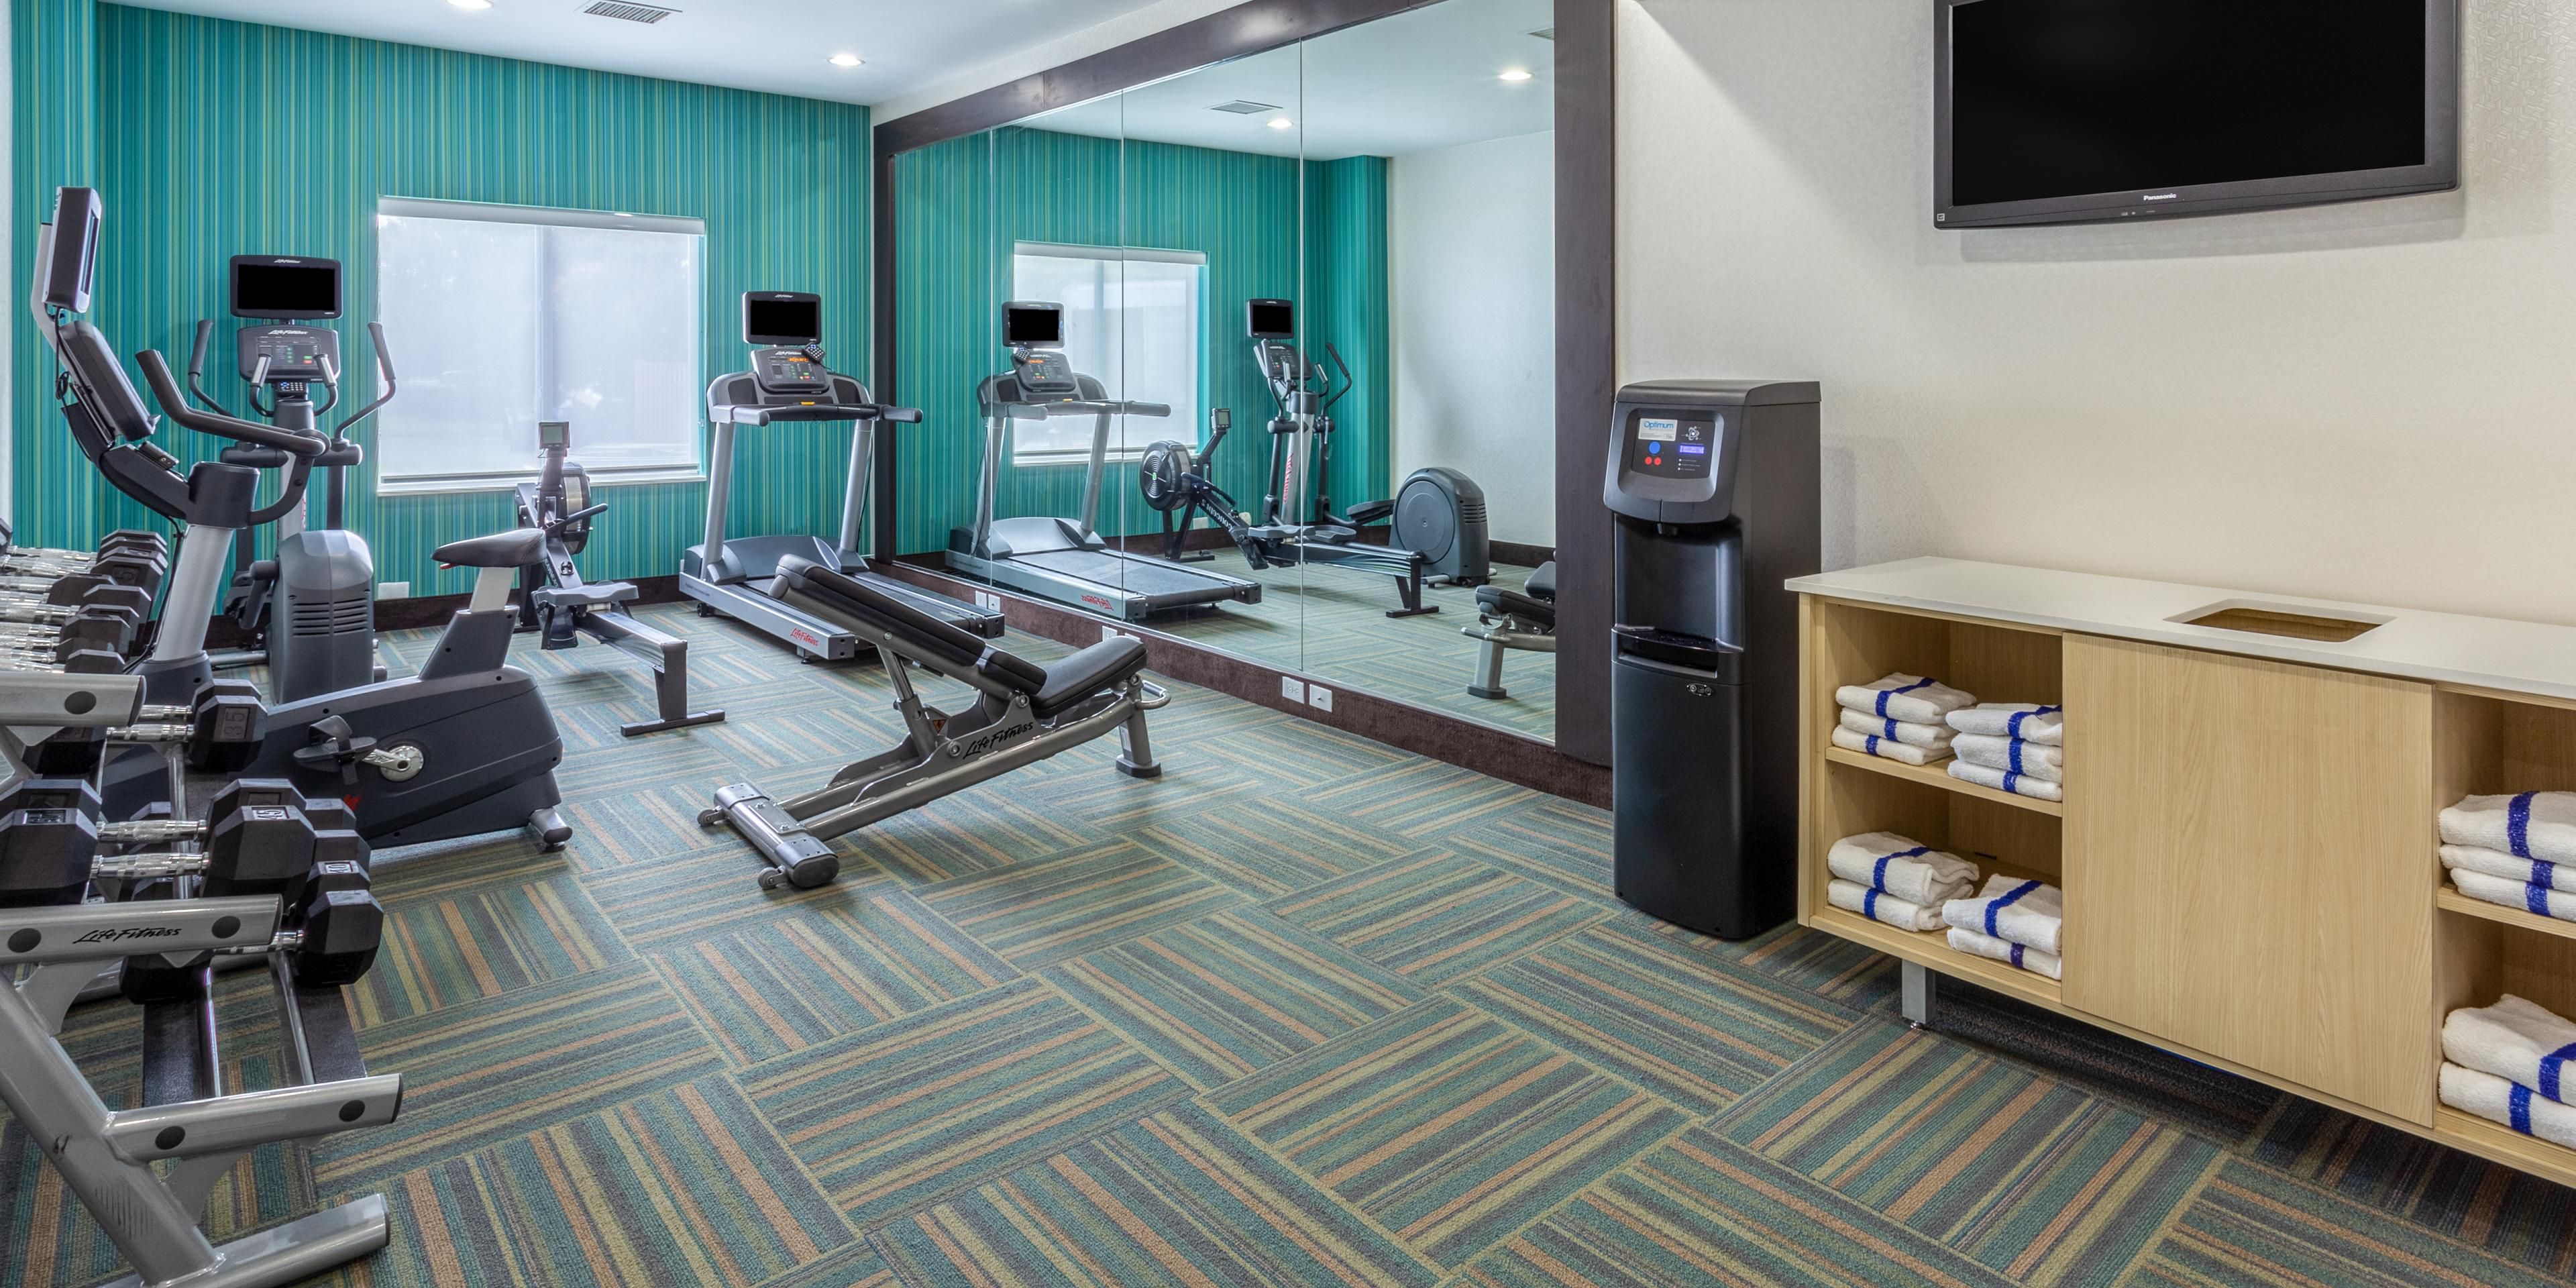 Our hotel is located near Sports Connection, Queens University Sports Complex, Tuckaseegee Dream Fields, Ramblewood Park-Soccer Complex, and OrthoCarolina Sportsplex. Contact the hotel to get a great group rate!